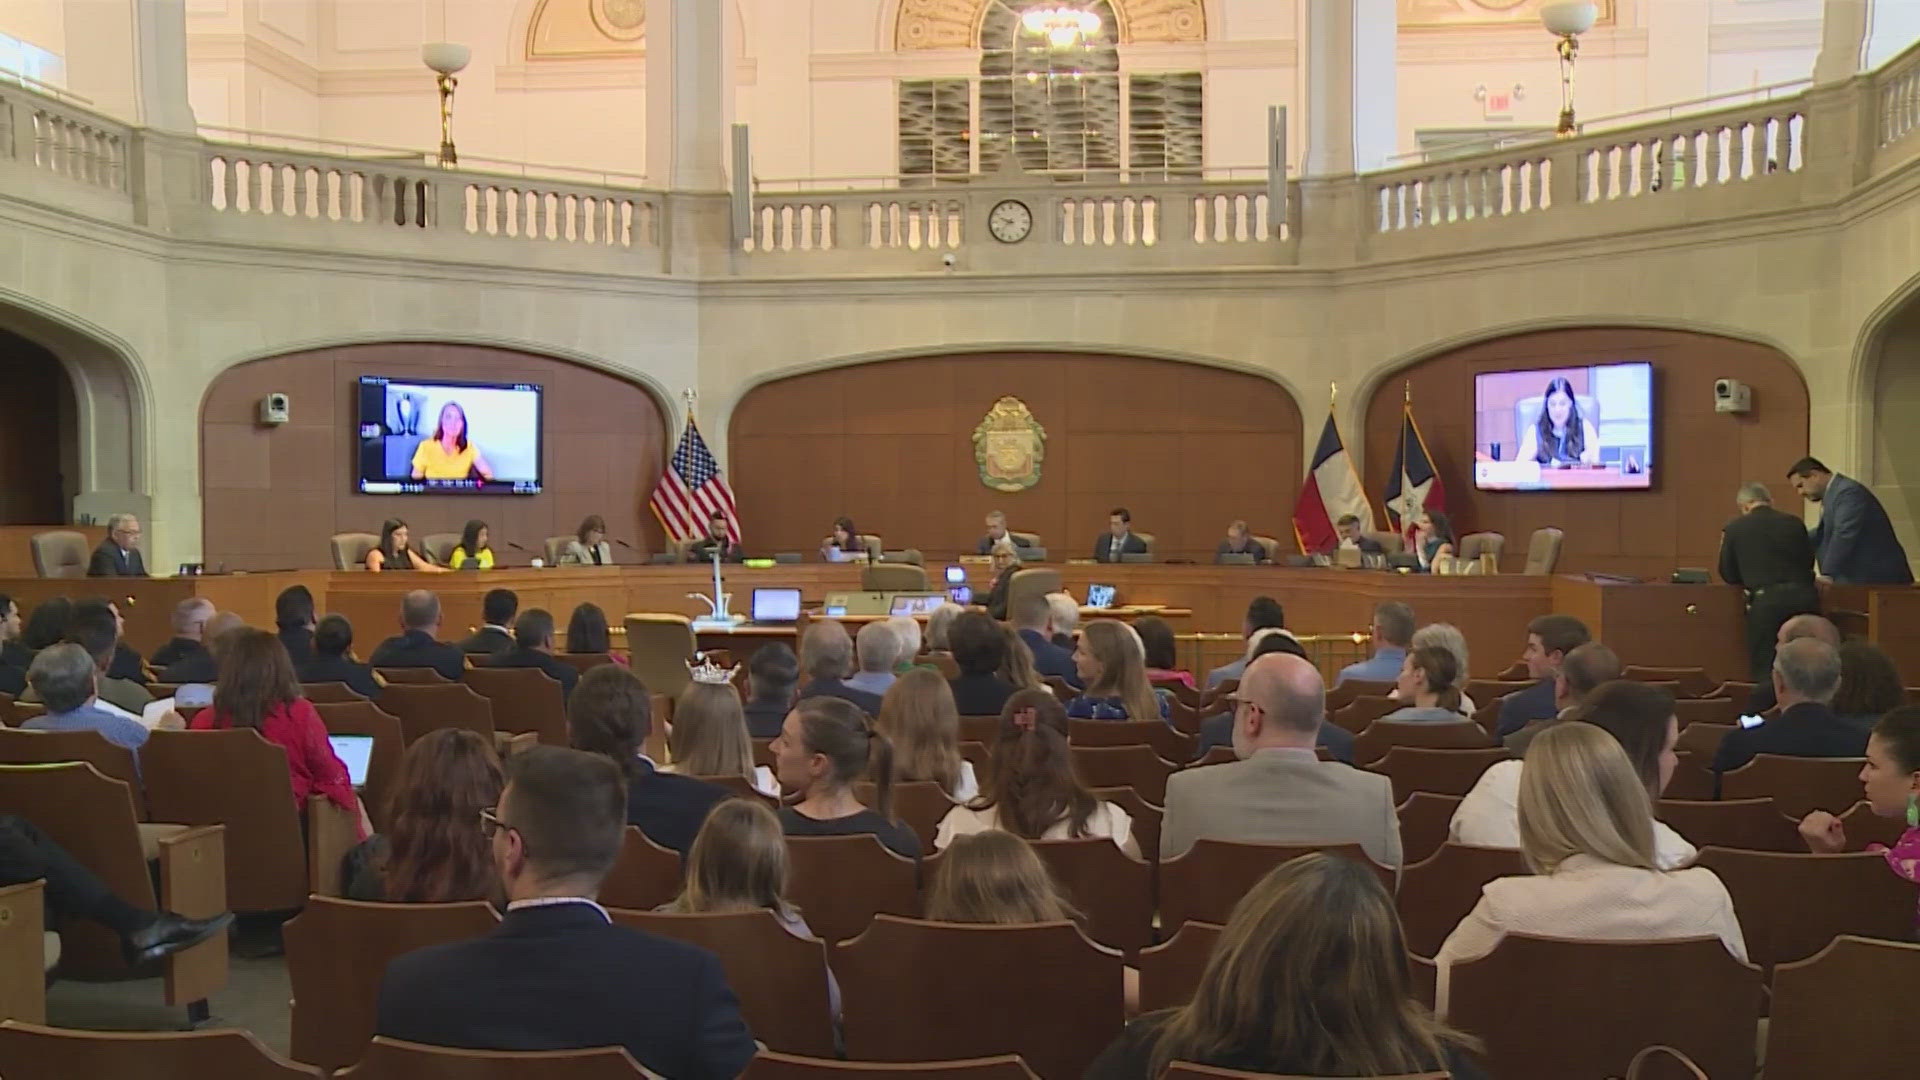 City Council considering whether or not they should get a raise